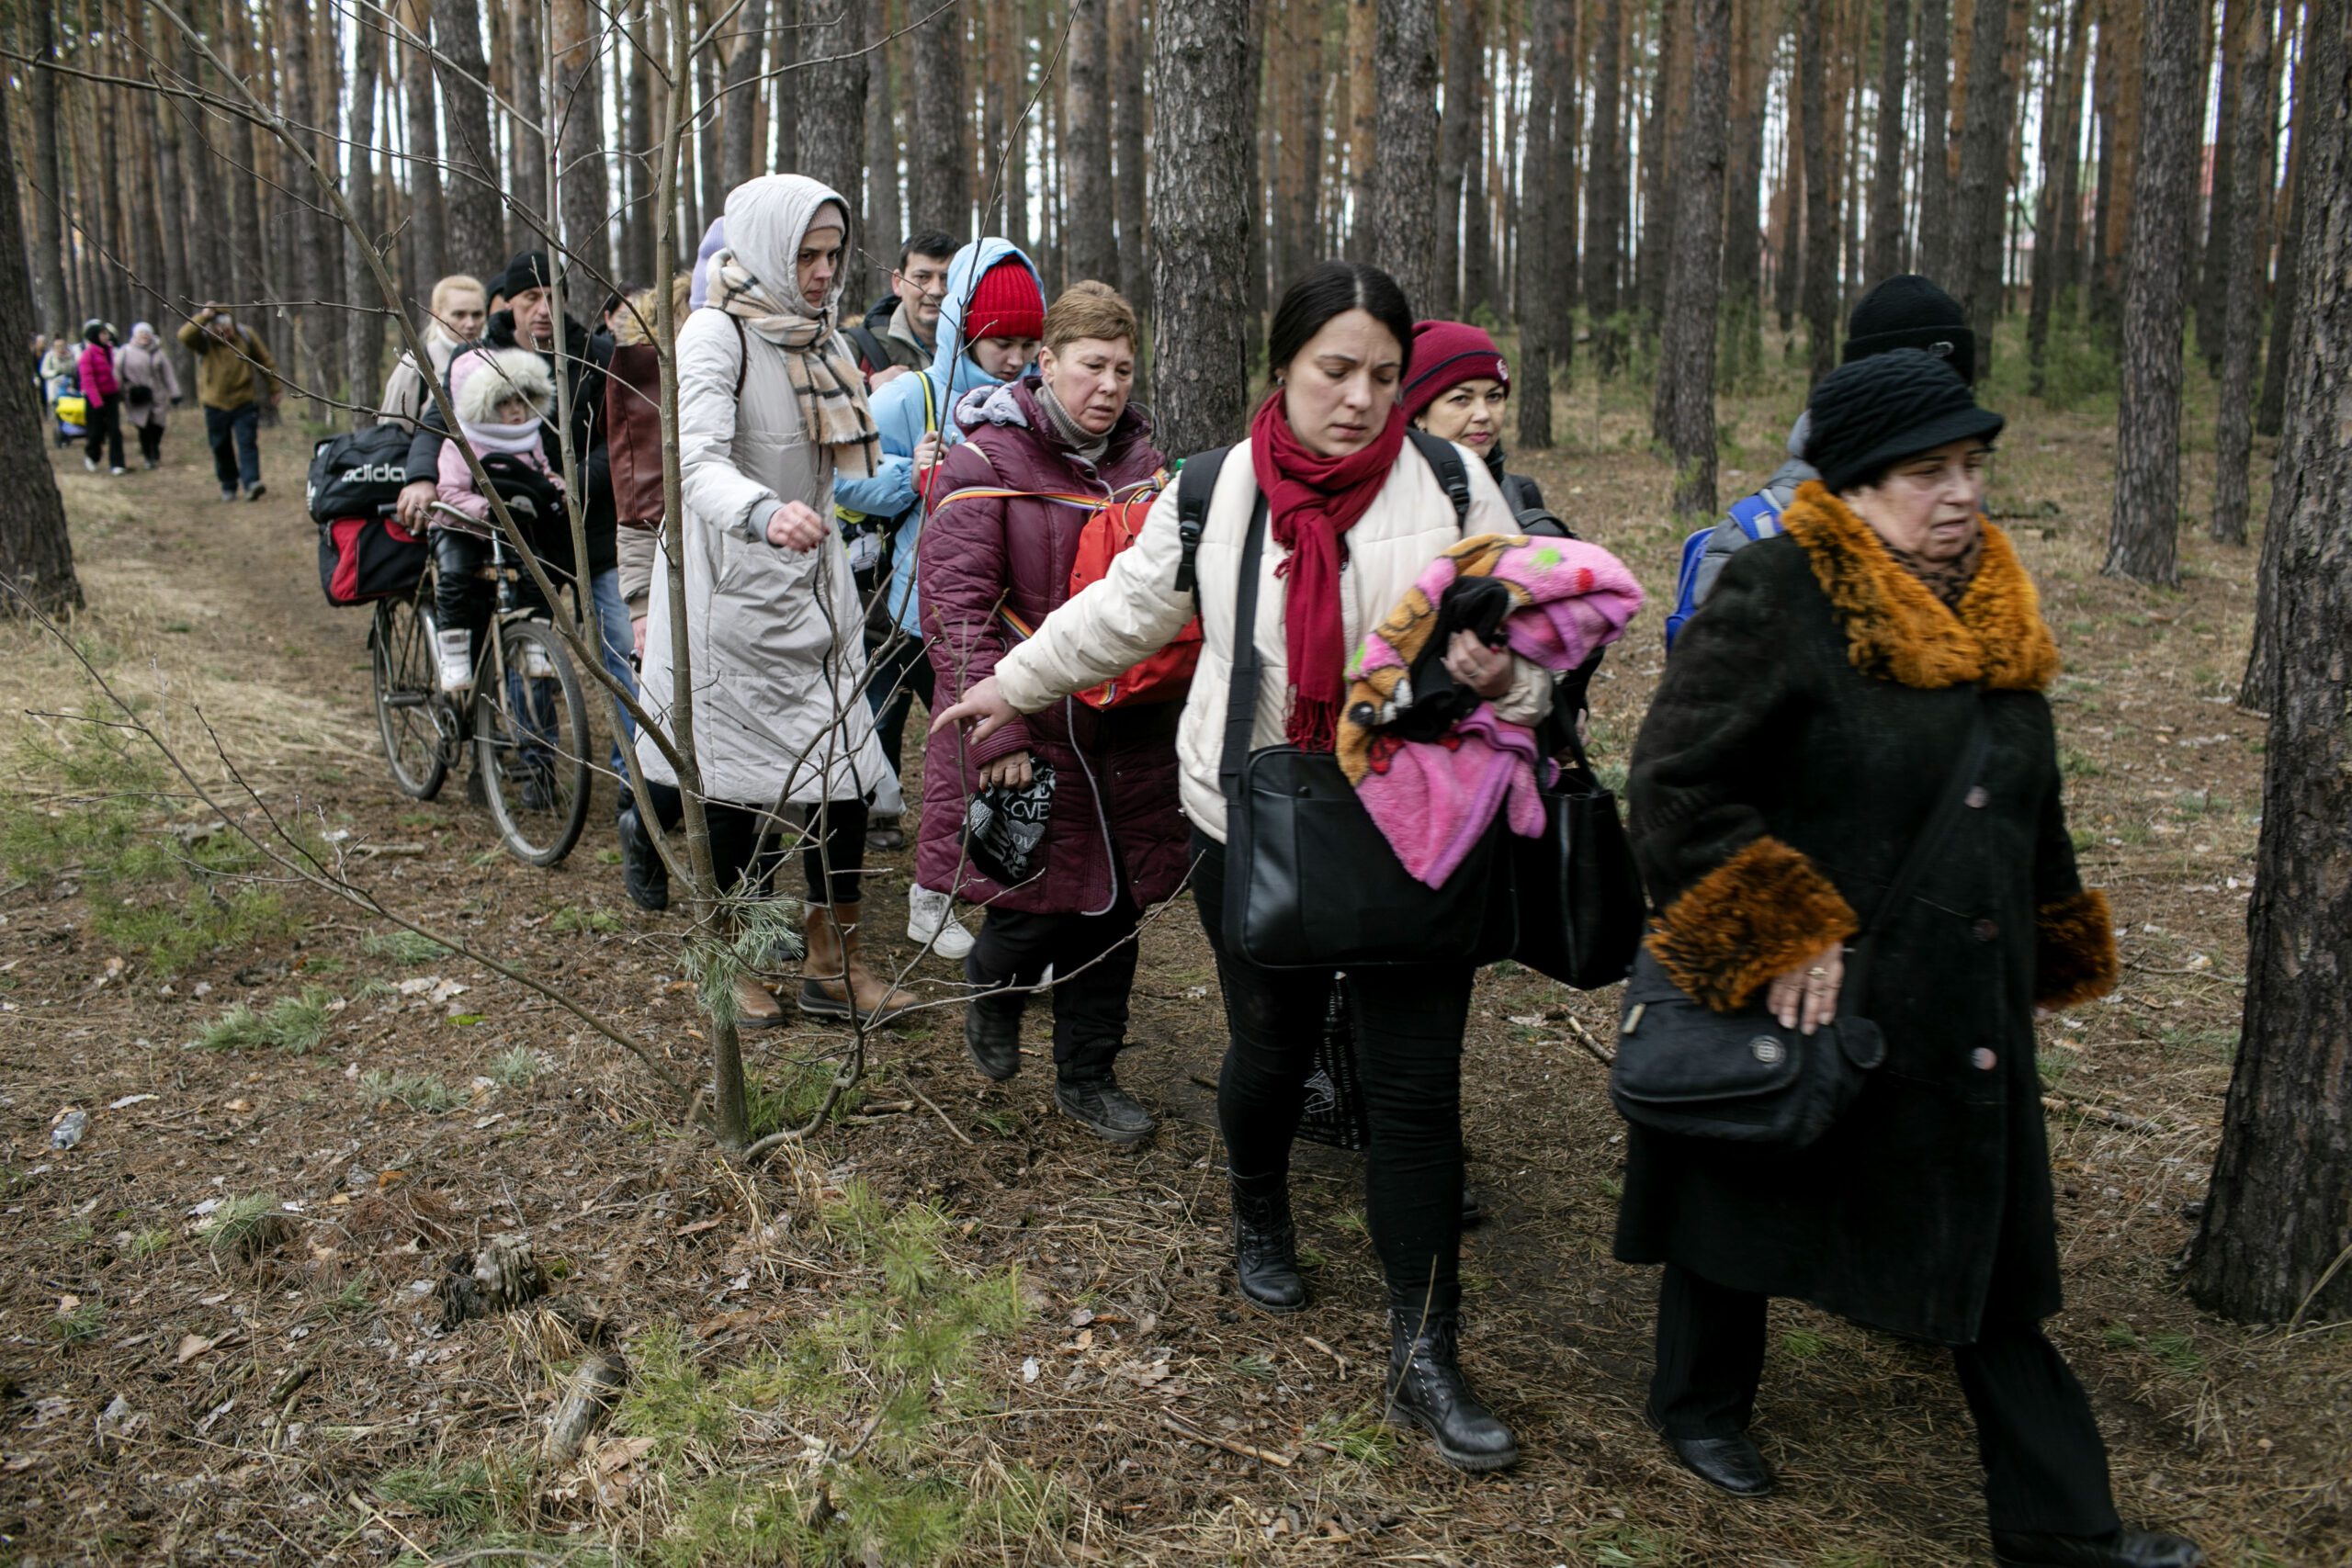 2022 in Review: War in Ukraine Adds to Record Displacement Worldwide